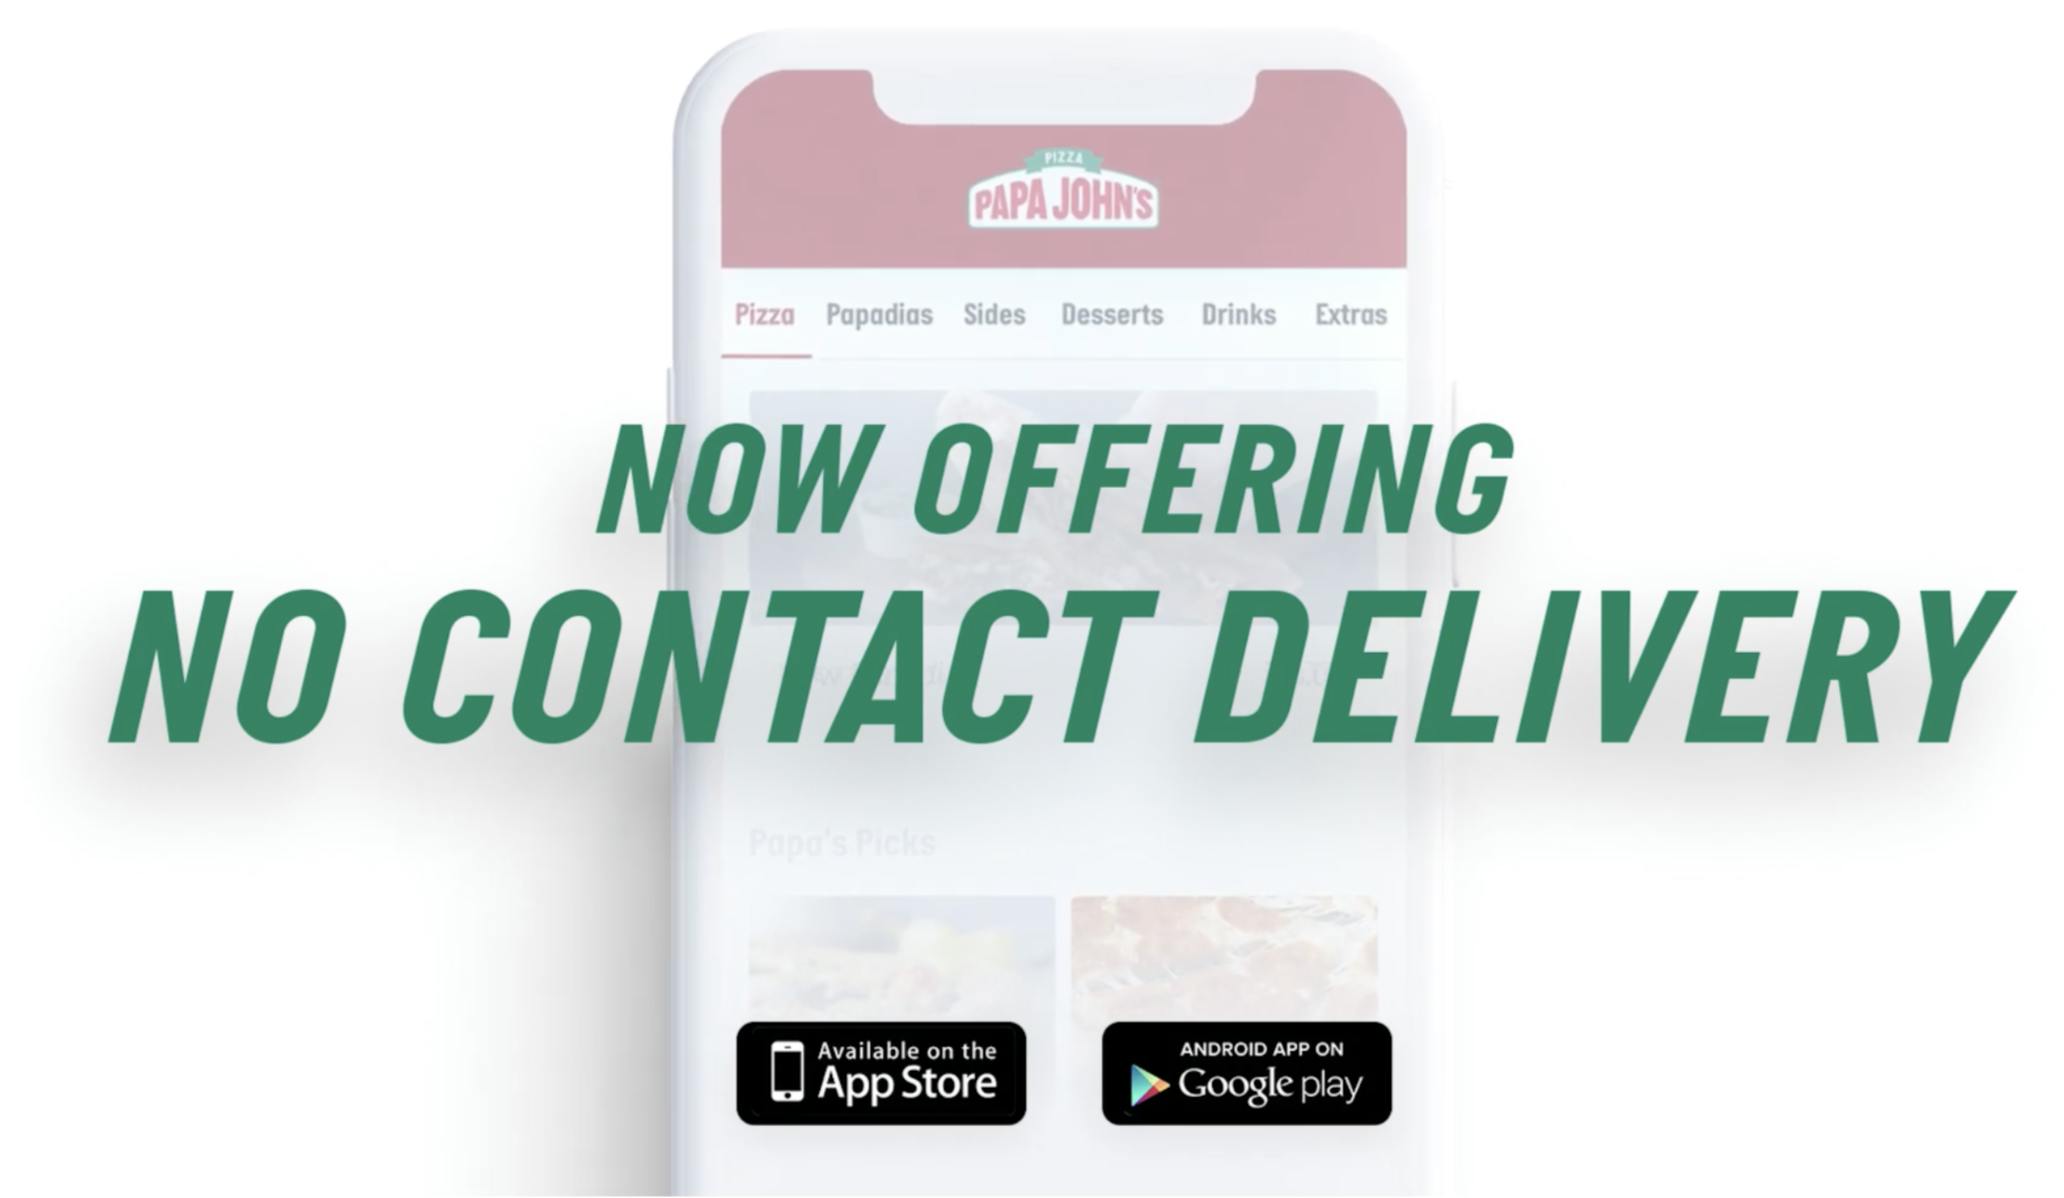 Papa Johns Pizza & Delivery – Apps no Google Play